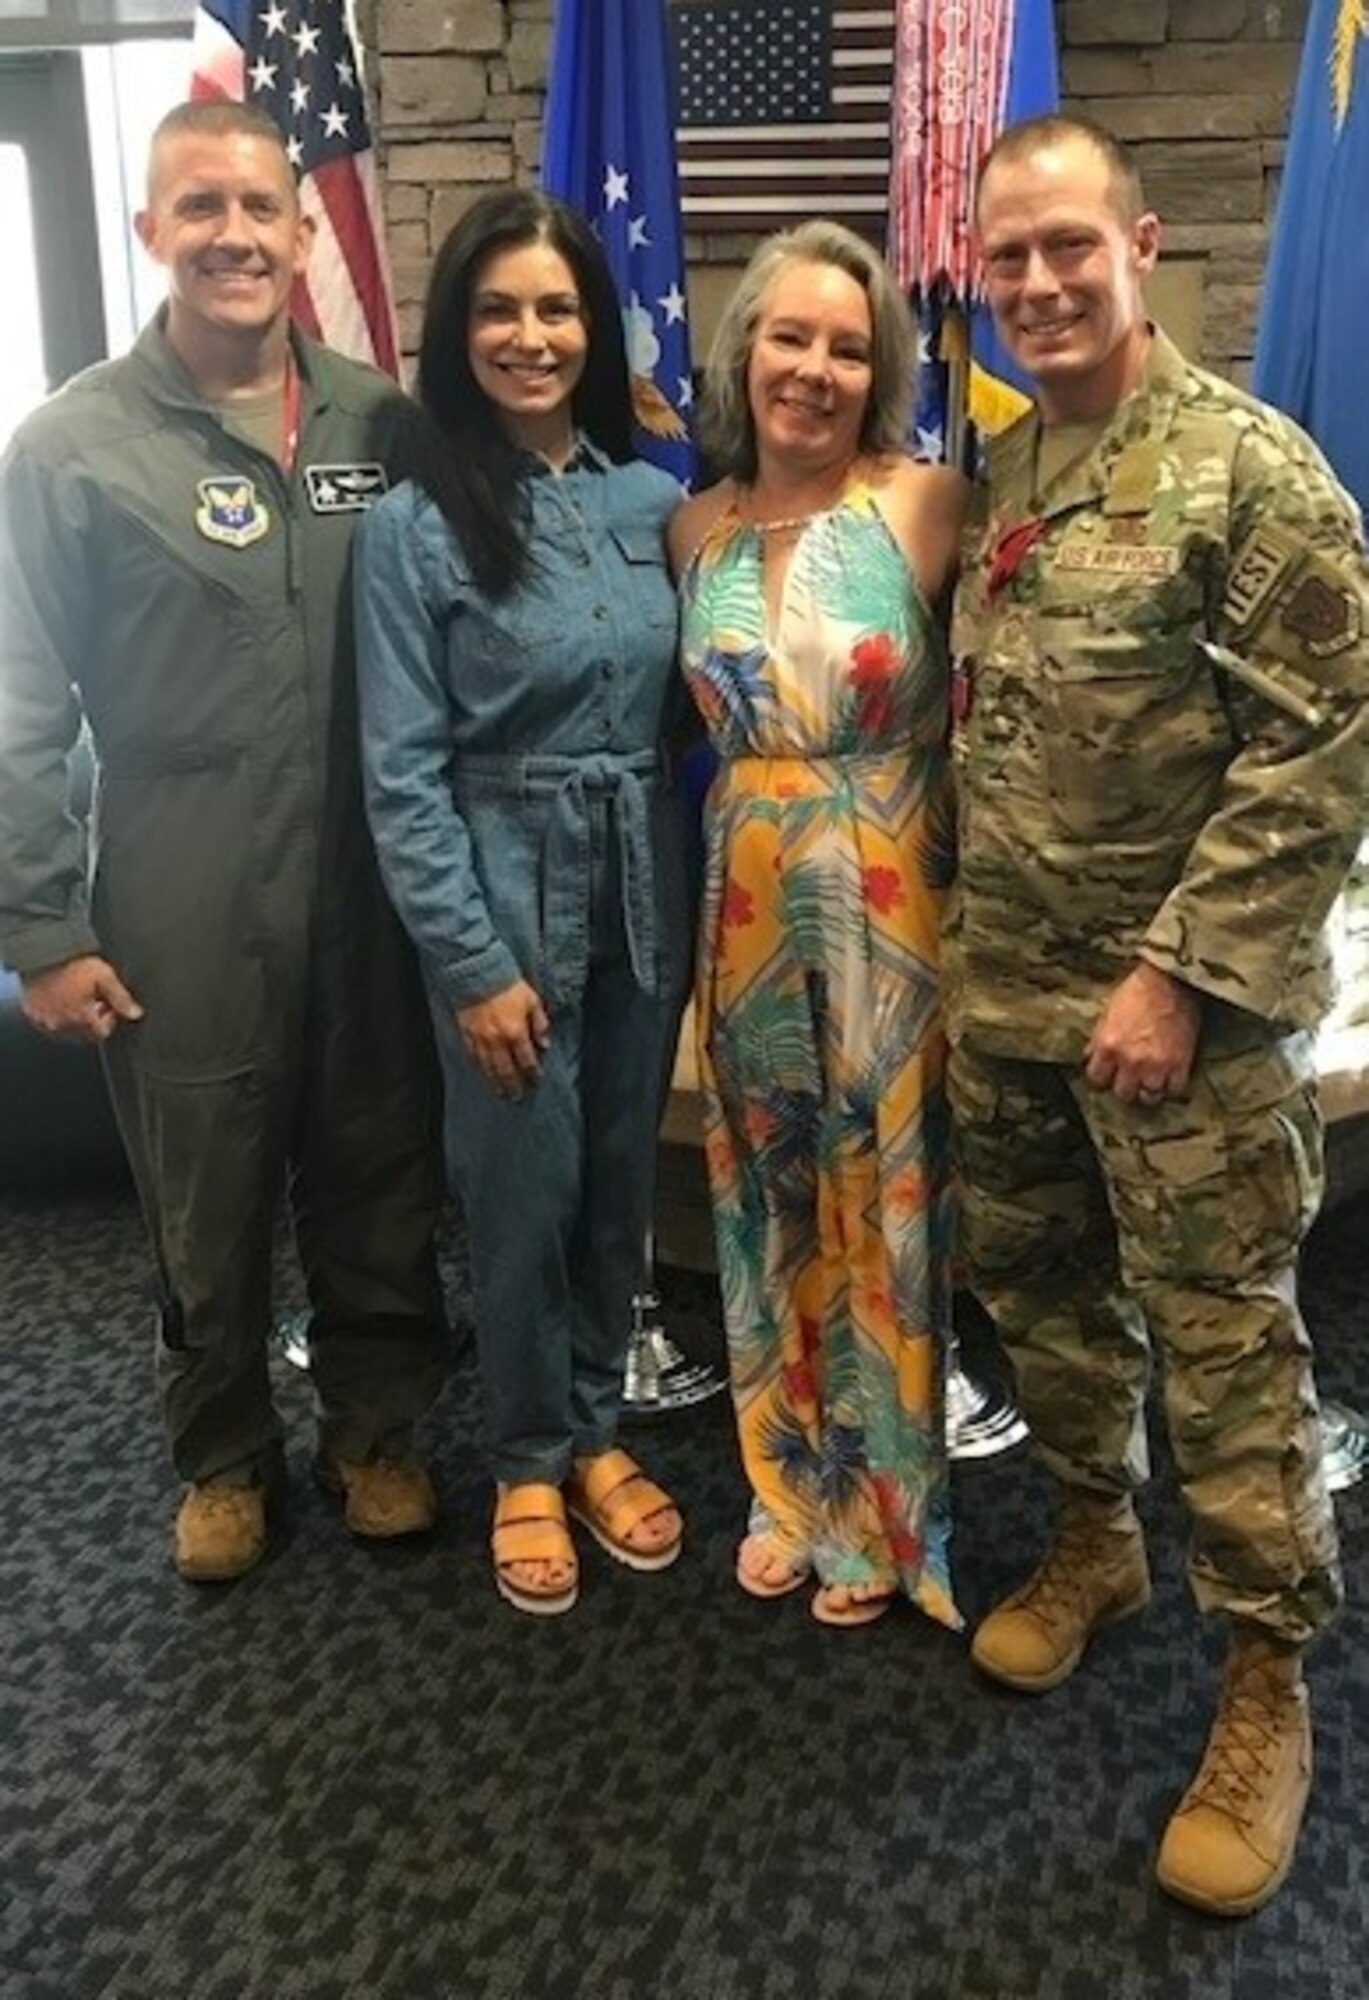 (Left to right) Air Force Operational Test and Evaluation Center Commander Maj. Gen. Trey Rawls, Scotta Rawls, Jamie Griste and AFOTEC Command CMSgt. Christopher Griste pose together during Chief Griste’s farewell party at Headquarters Air Force Operational Test and Evaluation Center April 14.